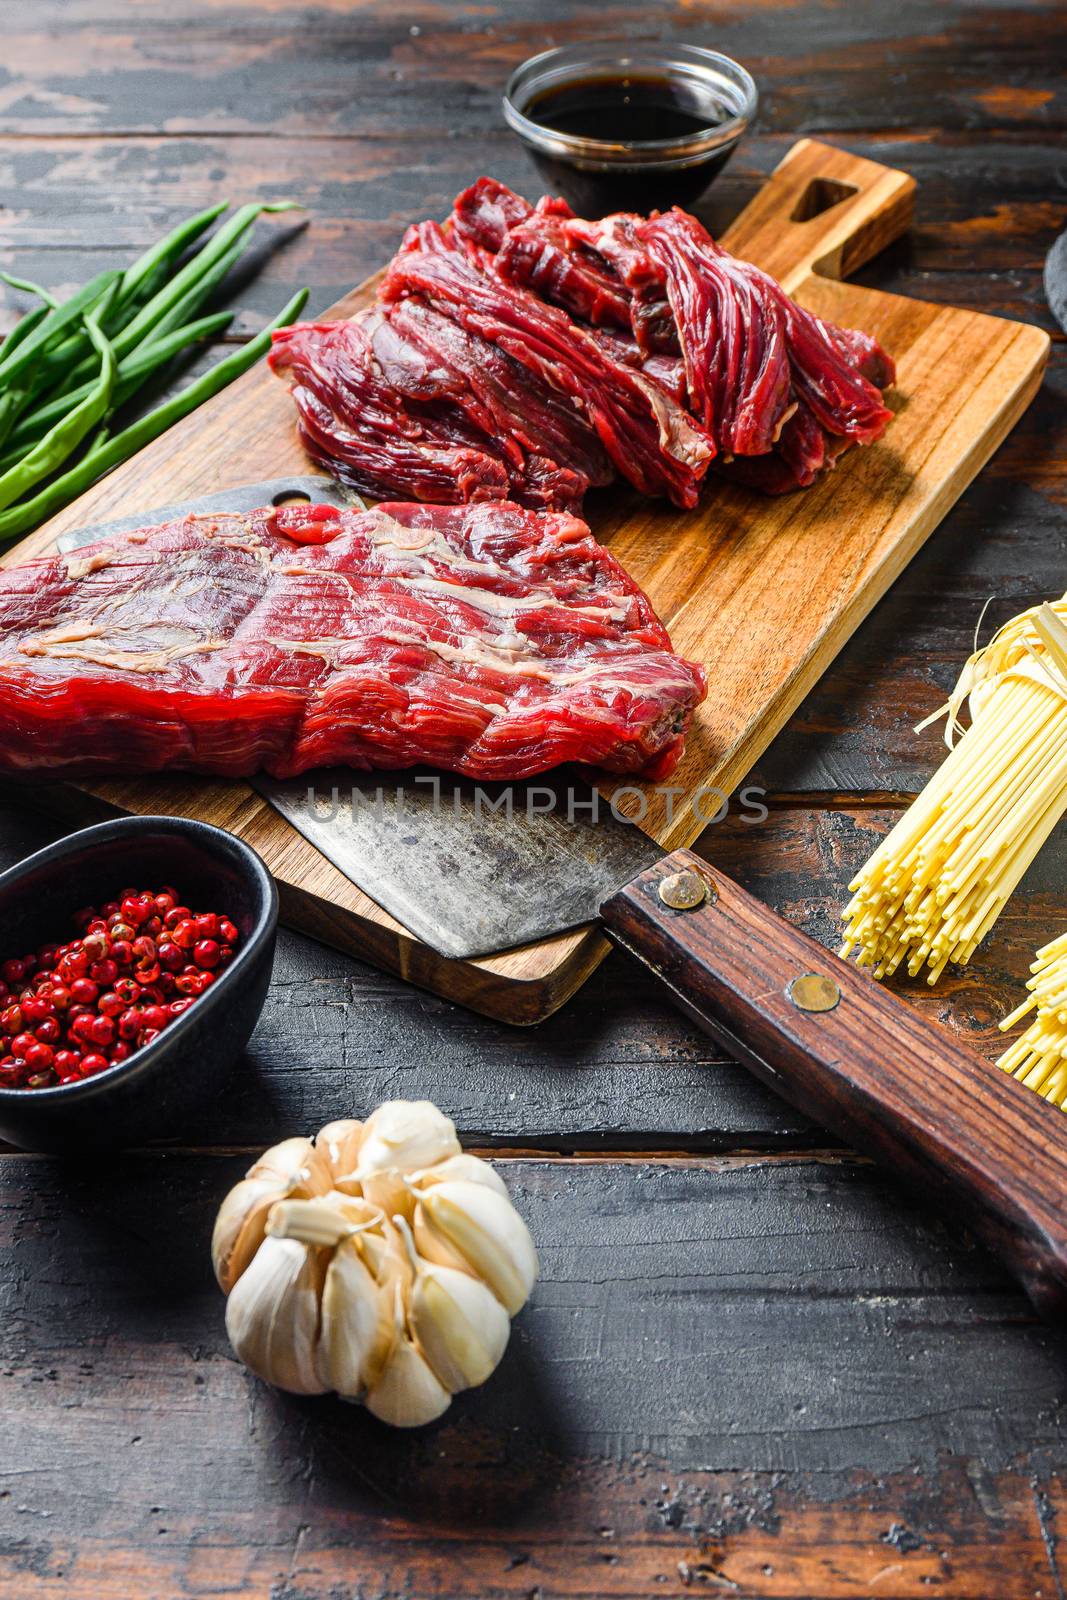 Chinese noodles with vegetables, . Machete steak and butcher cleaver over wooden background. Side view